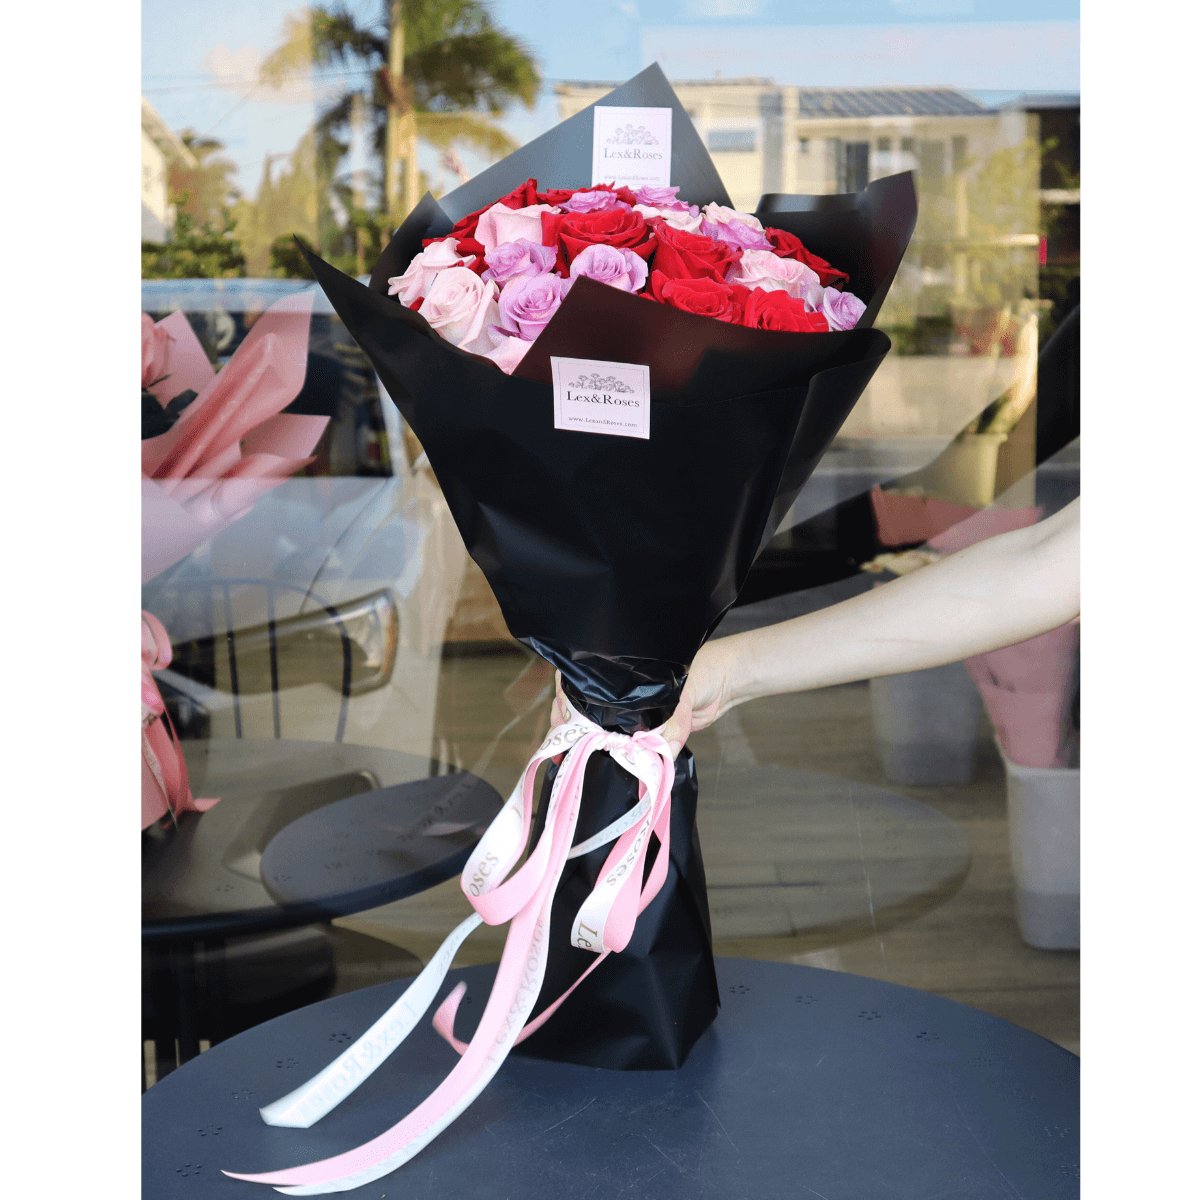 Deluxe Rose Bouquet - Nationwide – Lex&Roses